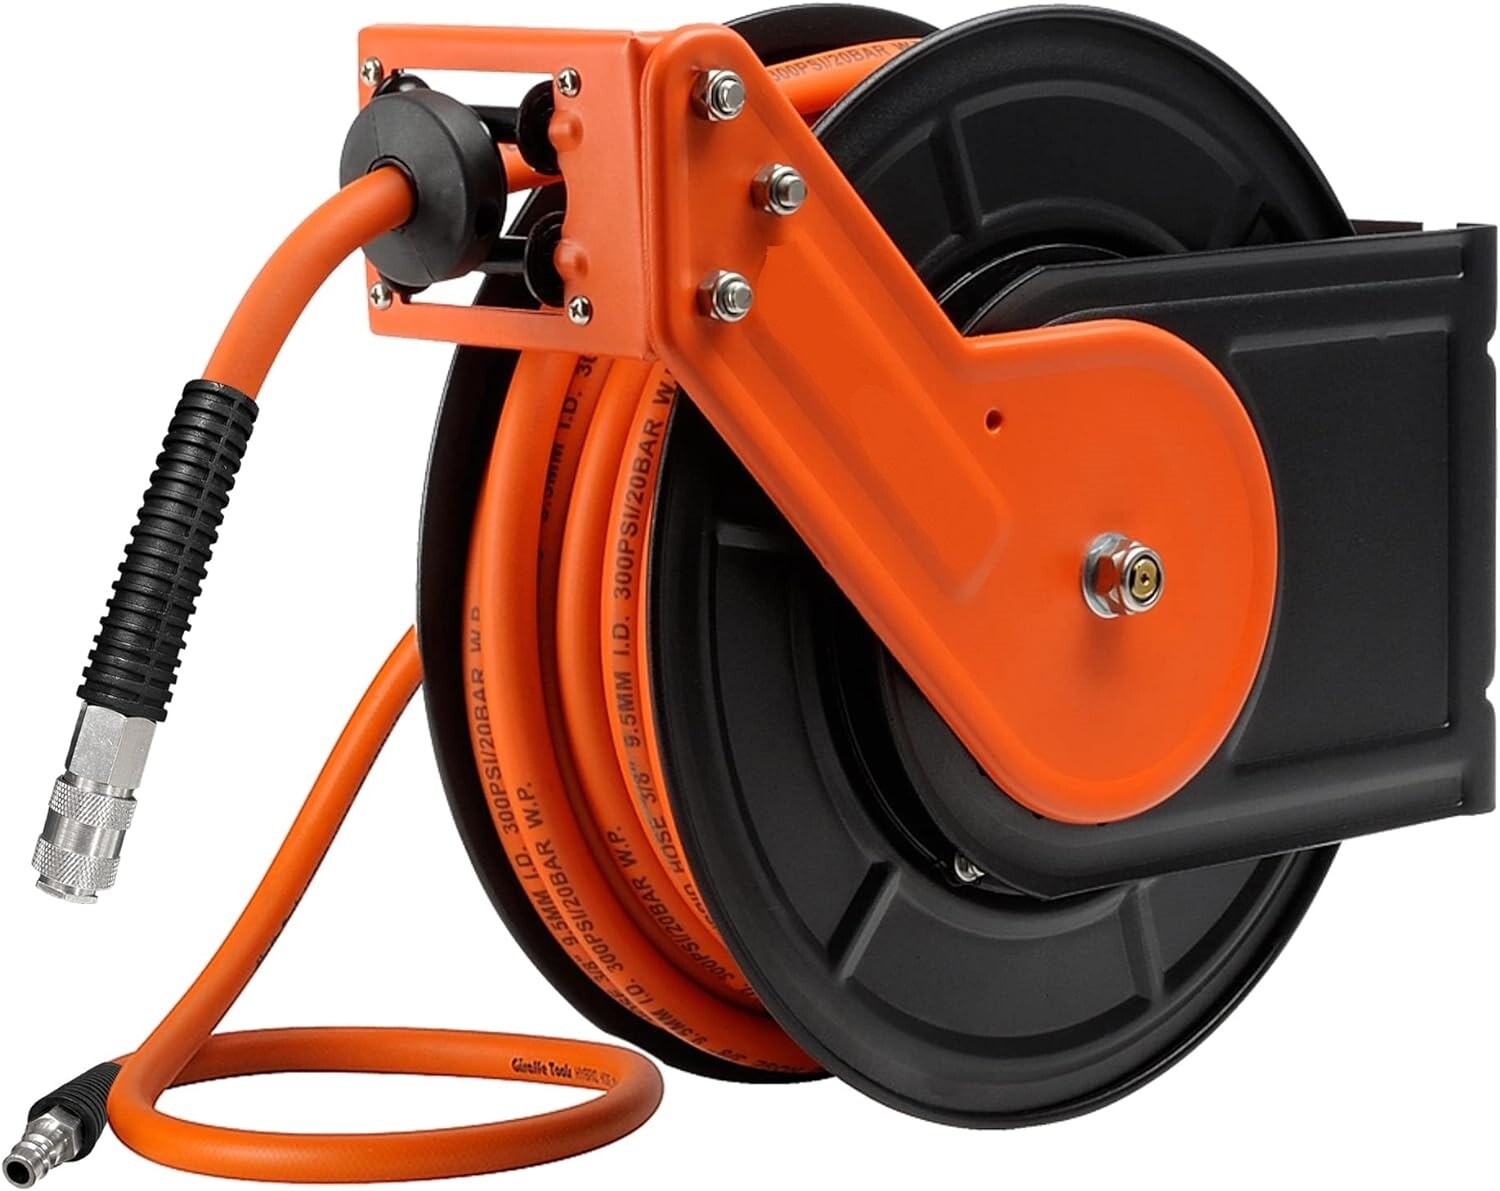 15m Retractable Air Line Reel +1m, Wall-Mounted Air Hse Reel 3/8" Hybrid Hose, and Pneumatic Heavy-Duty Steel Reel with 1/4" Quick Coupler